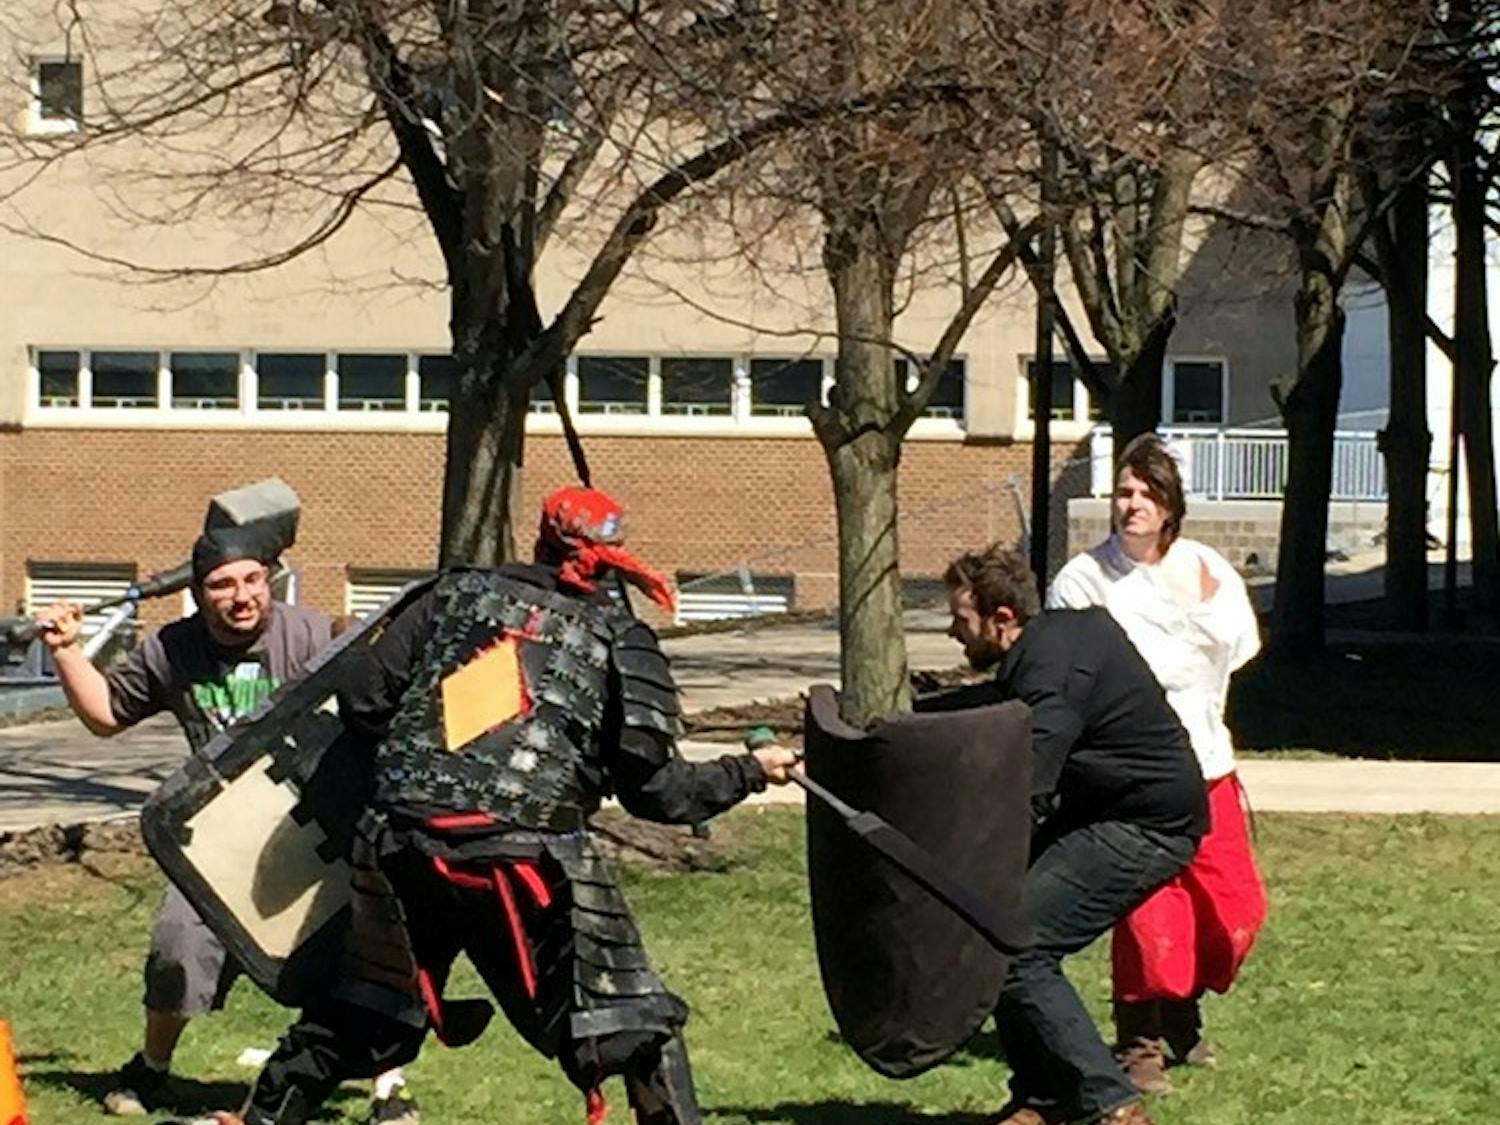 People from all over Western New York armed themselves with shields, swords and their most intimidating armor in UBCon's LARP tournament.